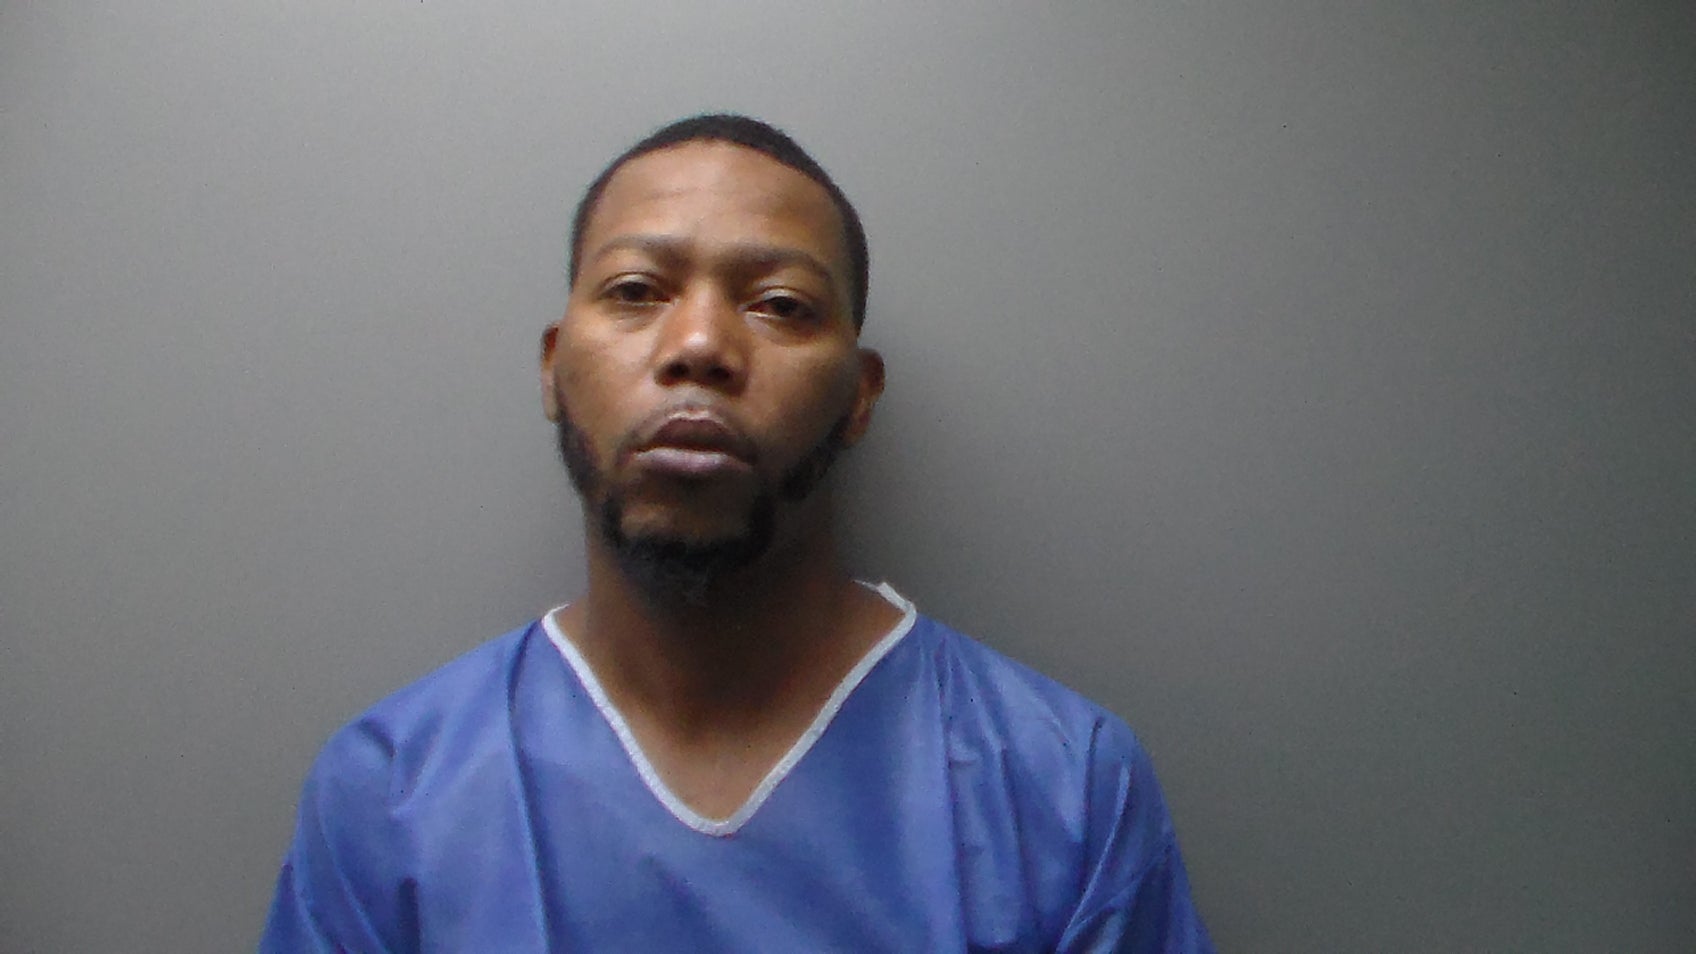 Update Troy Woman Fatally Shot Suspect Charged With Capital Murder The Troy Messenger The 9369